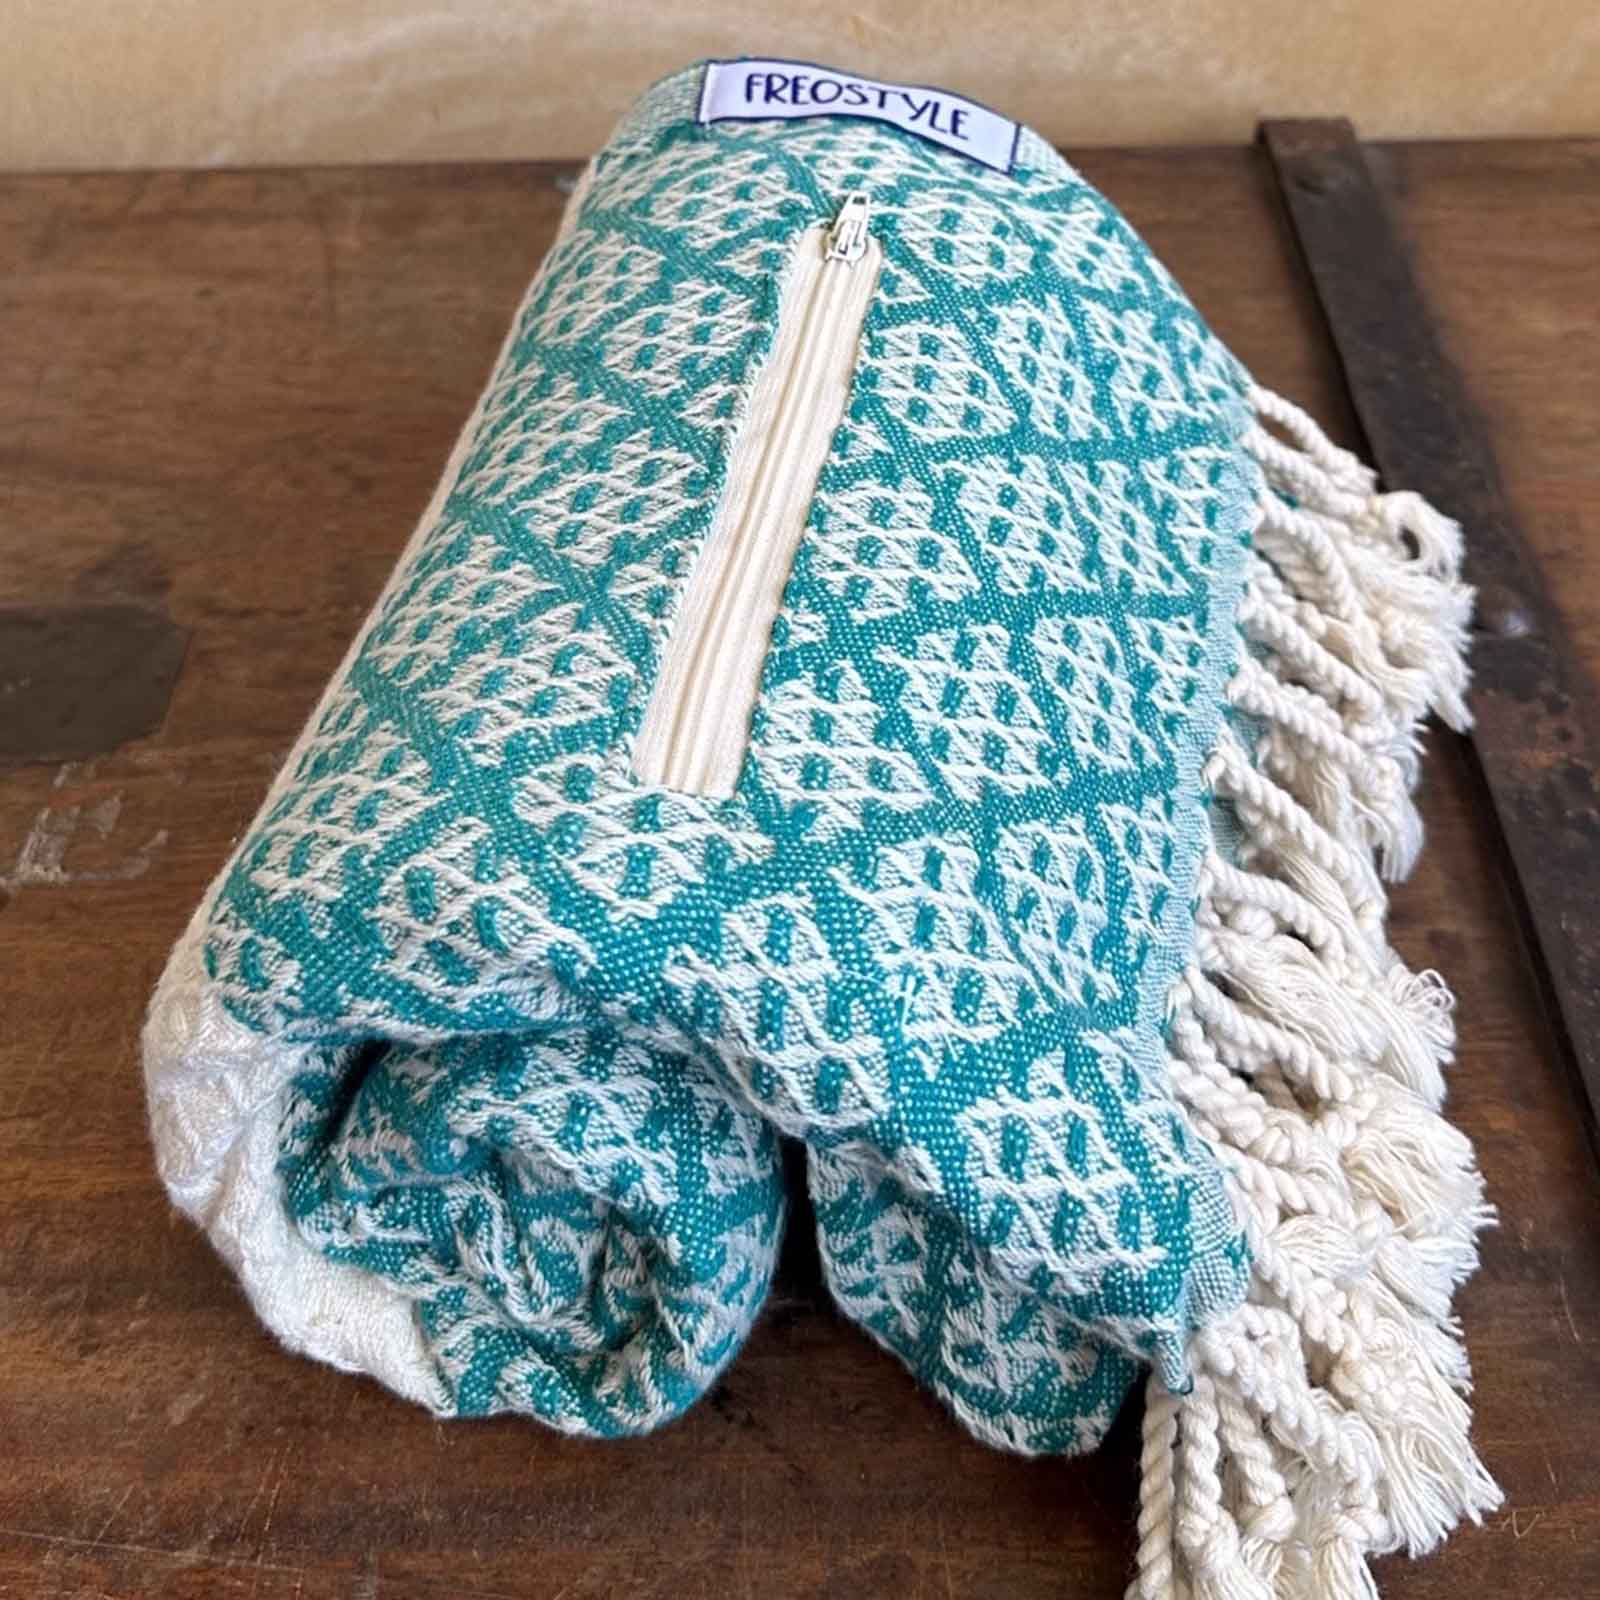 Greenbee Turkish Towel with pocket, by Freostyle, rolled